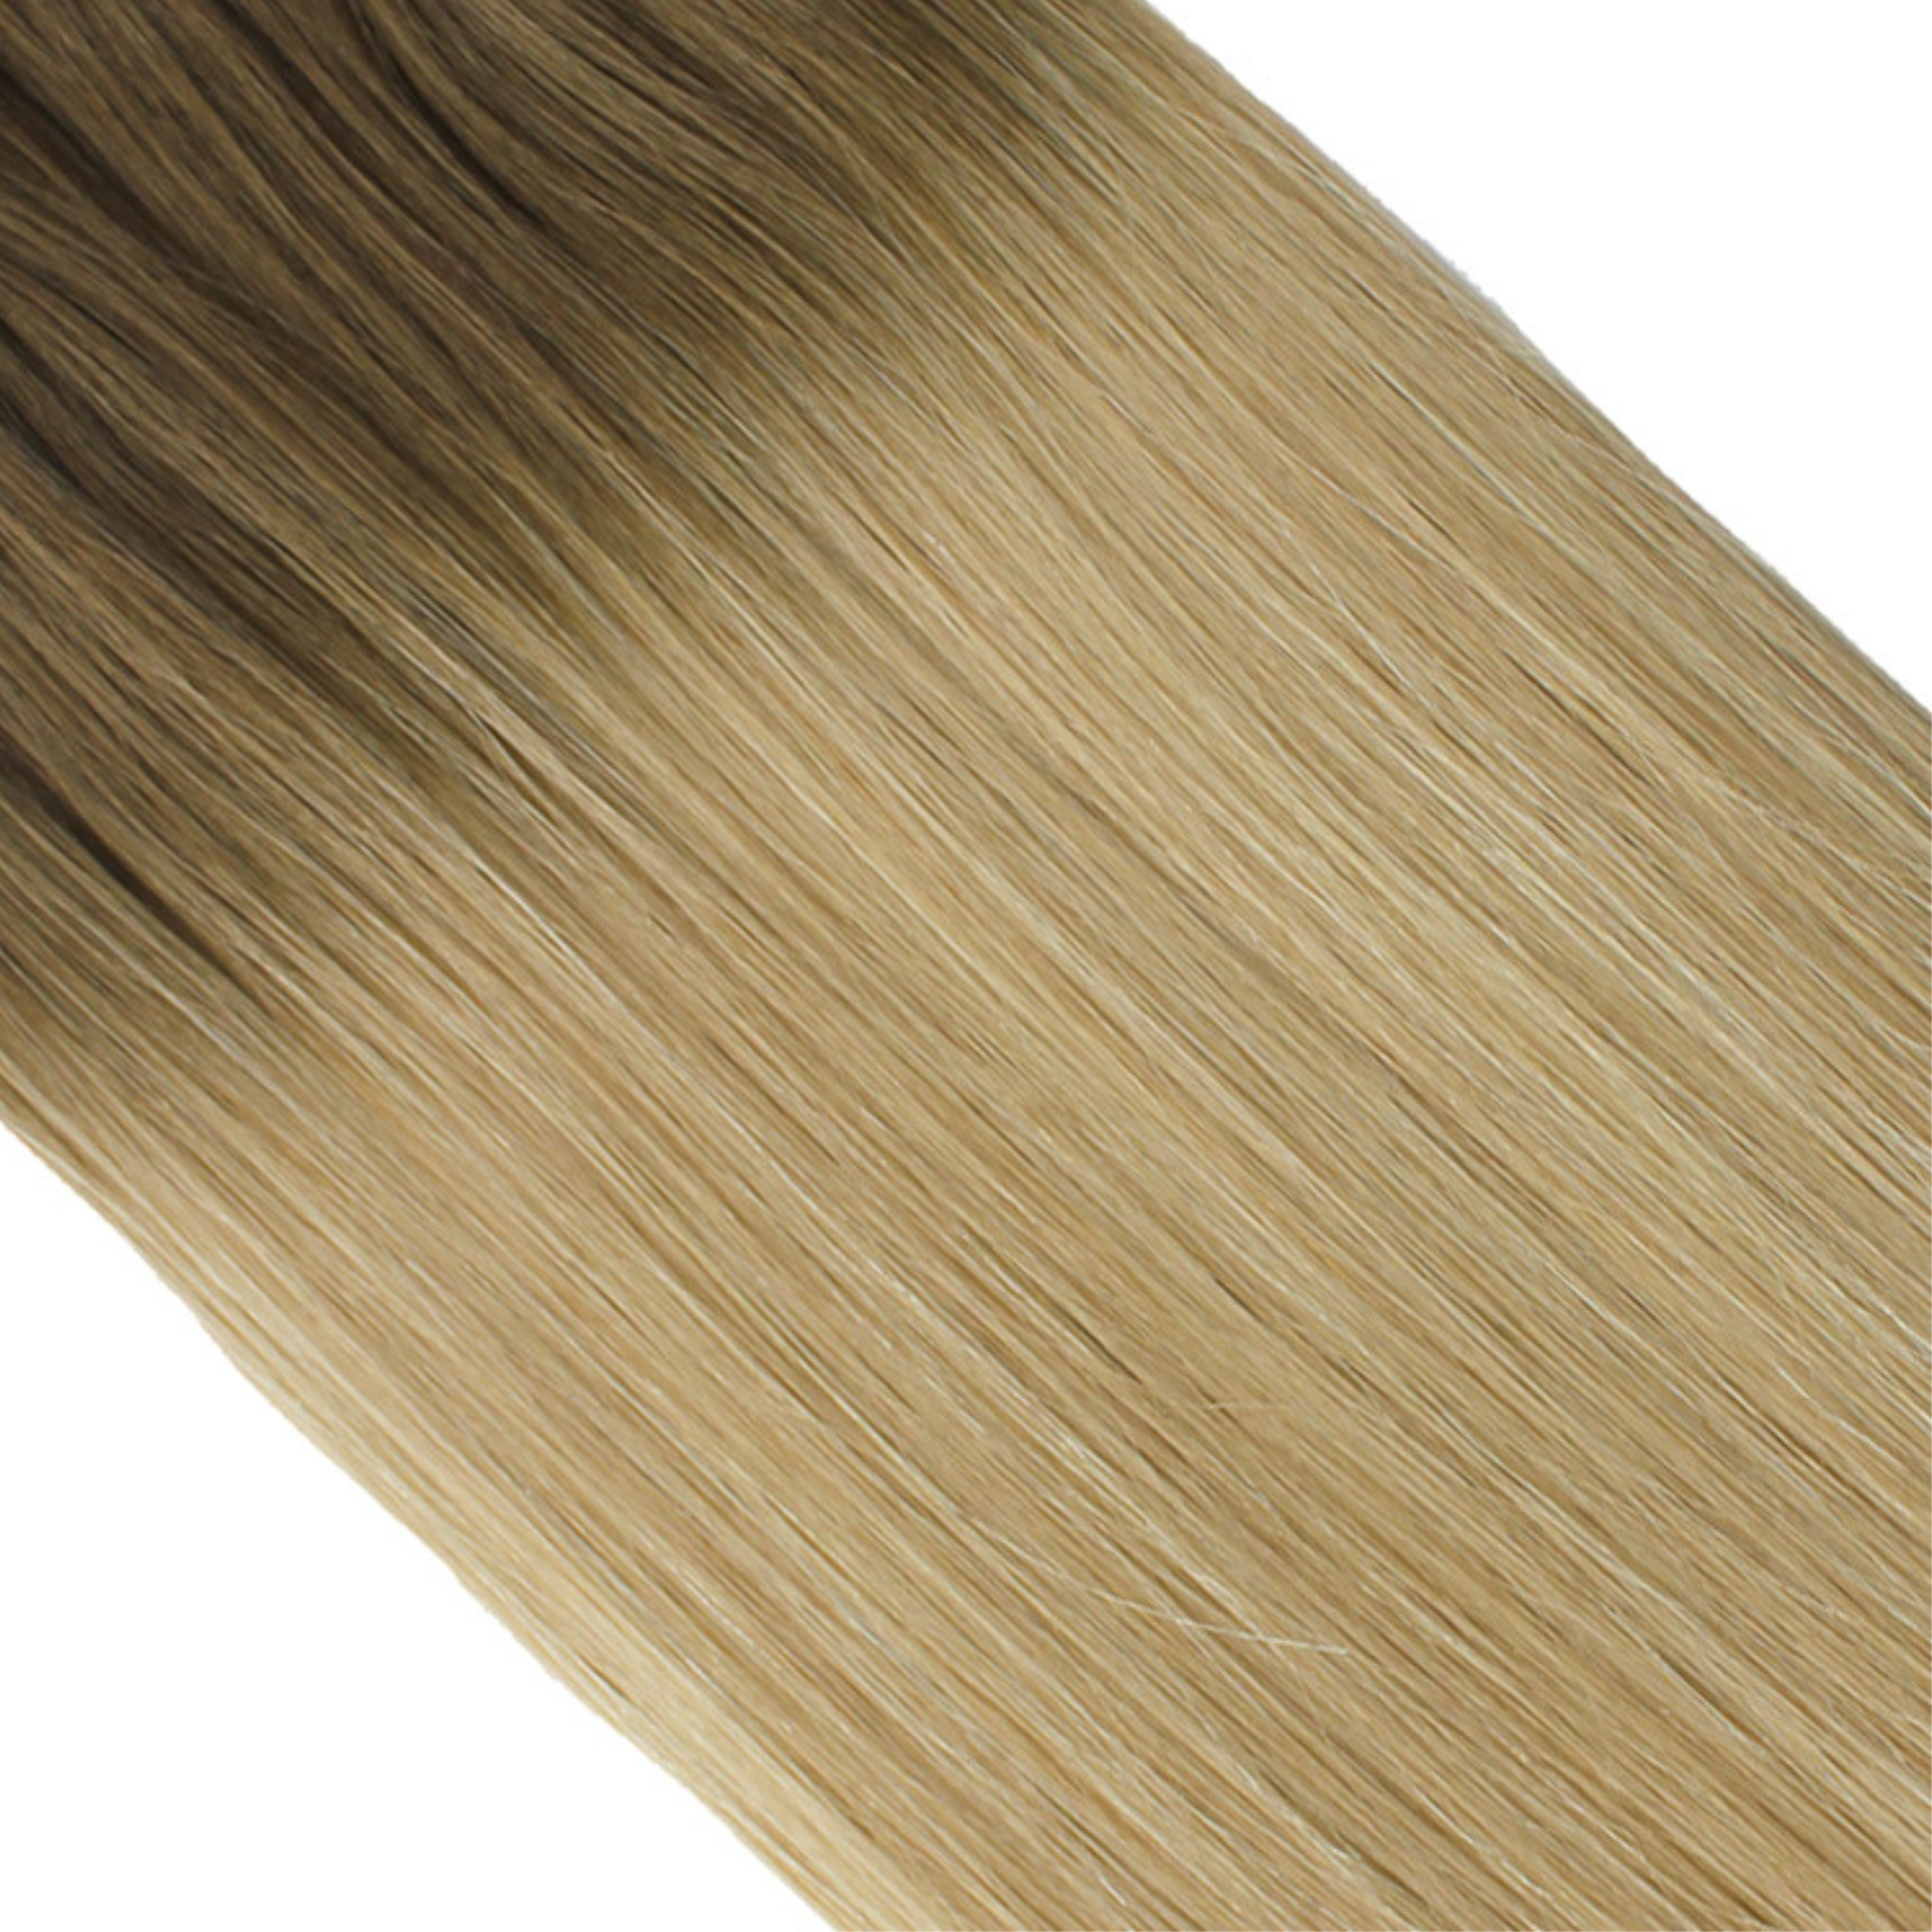 "hair rehab london 22" tape hair extensions shade swatch titled rooted dirty blonde"